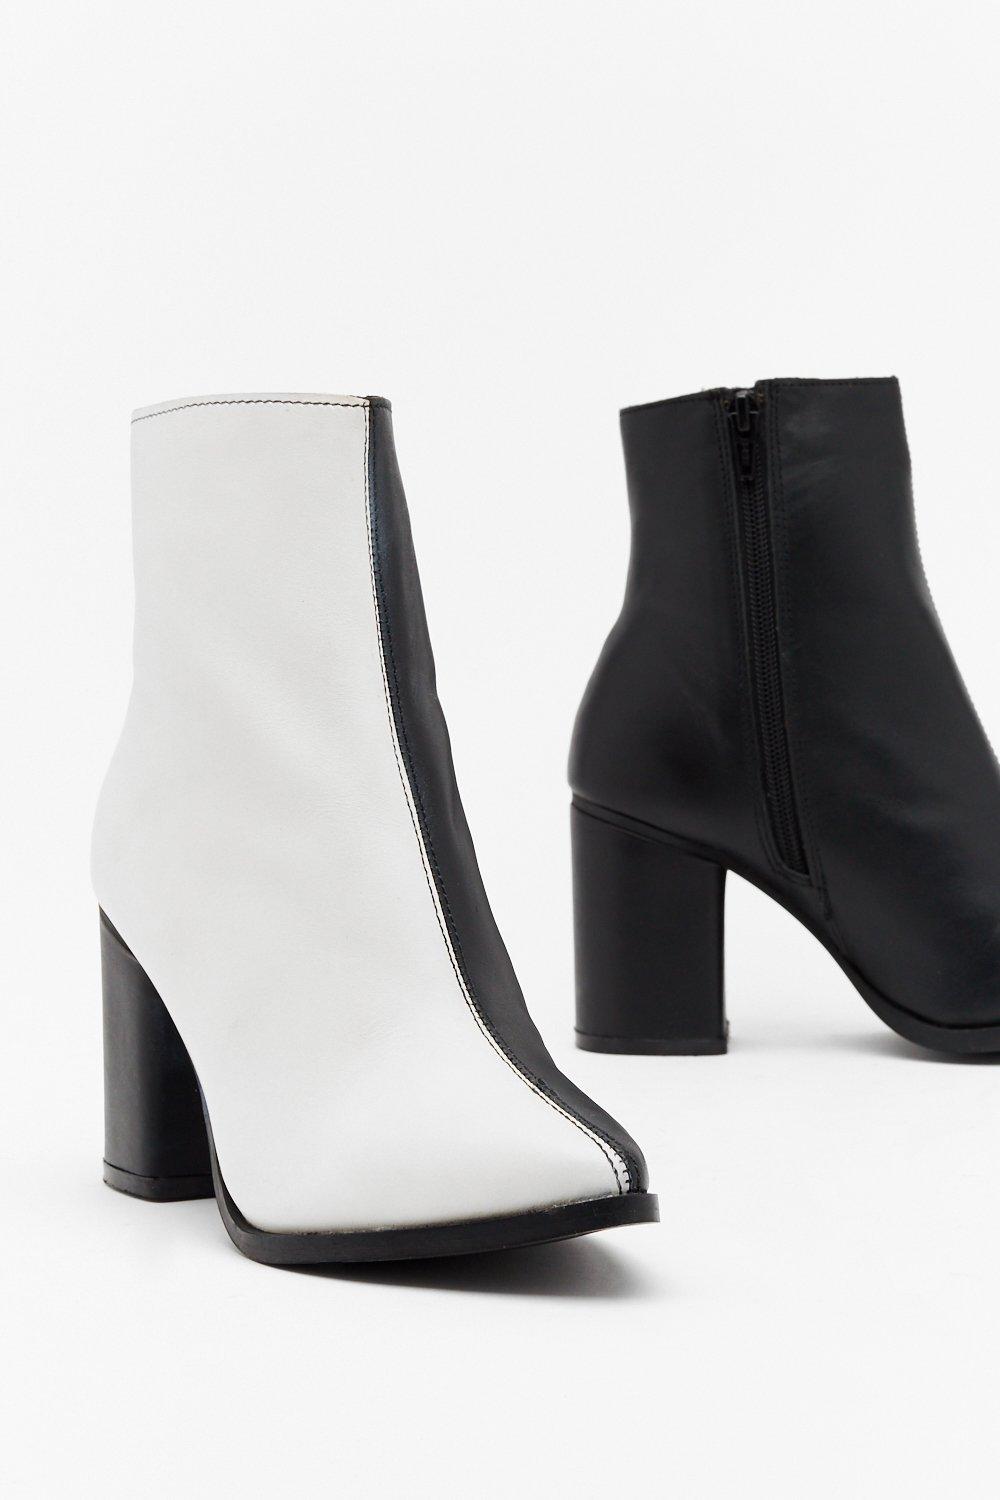 black and white bootie heels